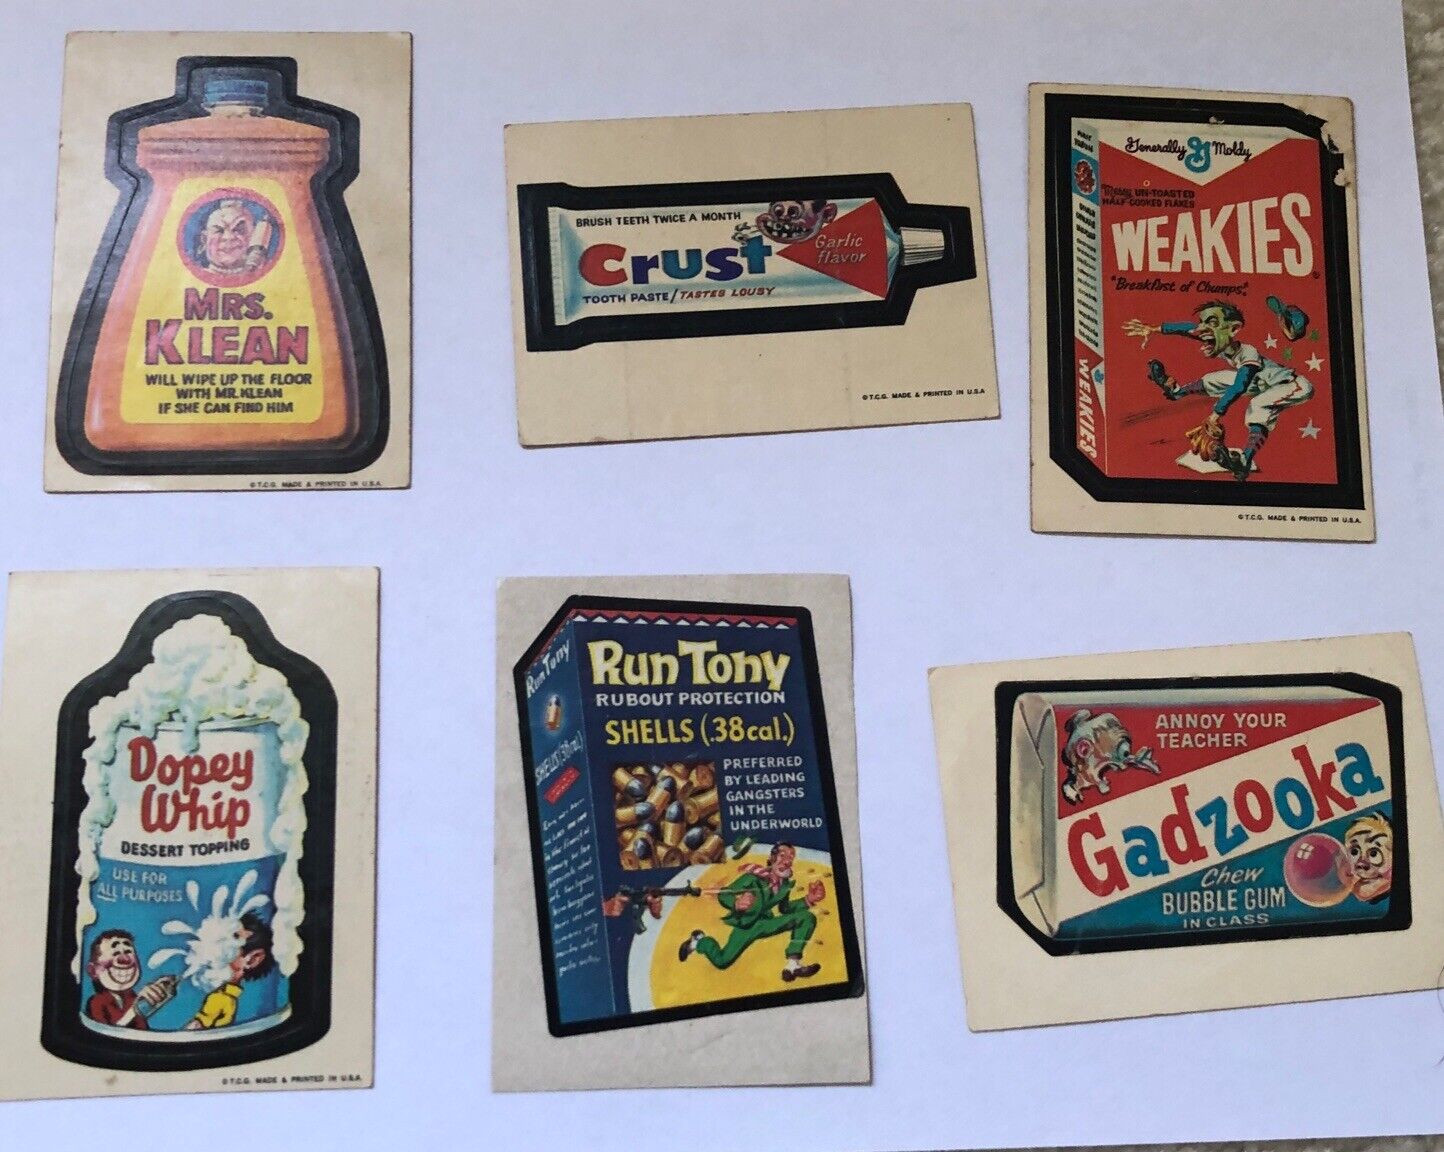 1973 Topps Wacky Packages 1st Series Lot Of 6 Mixed Backs. PLEASE READ